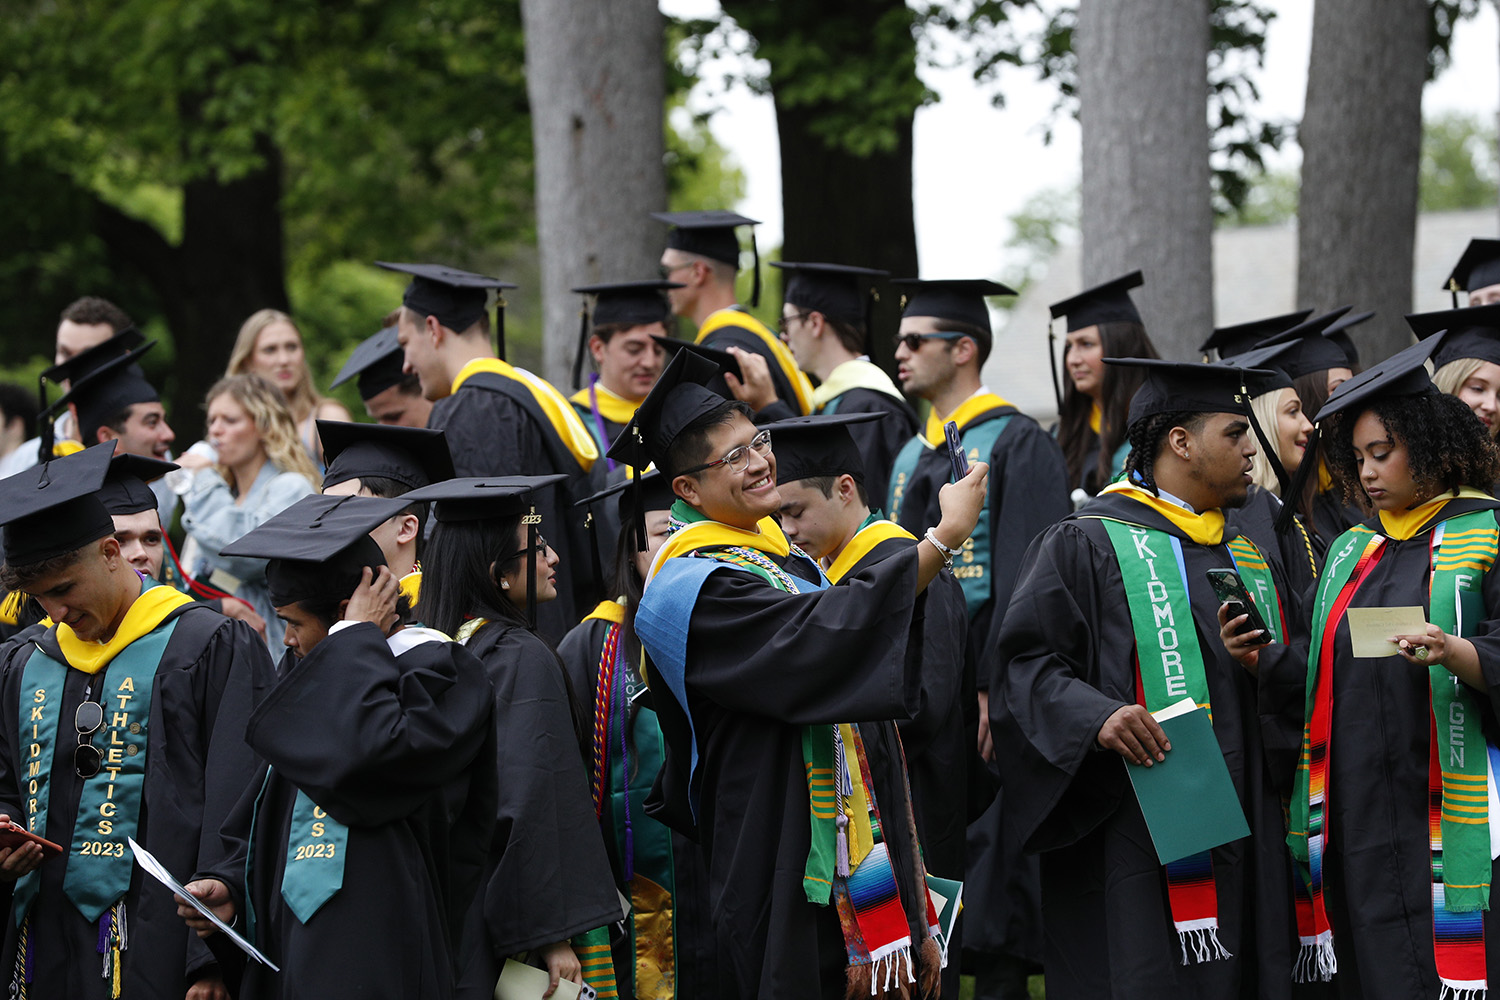 Skidmore College 112th Commencement Exercises for the Class of 2023